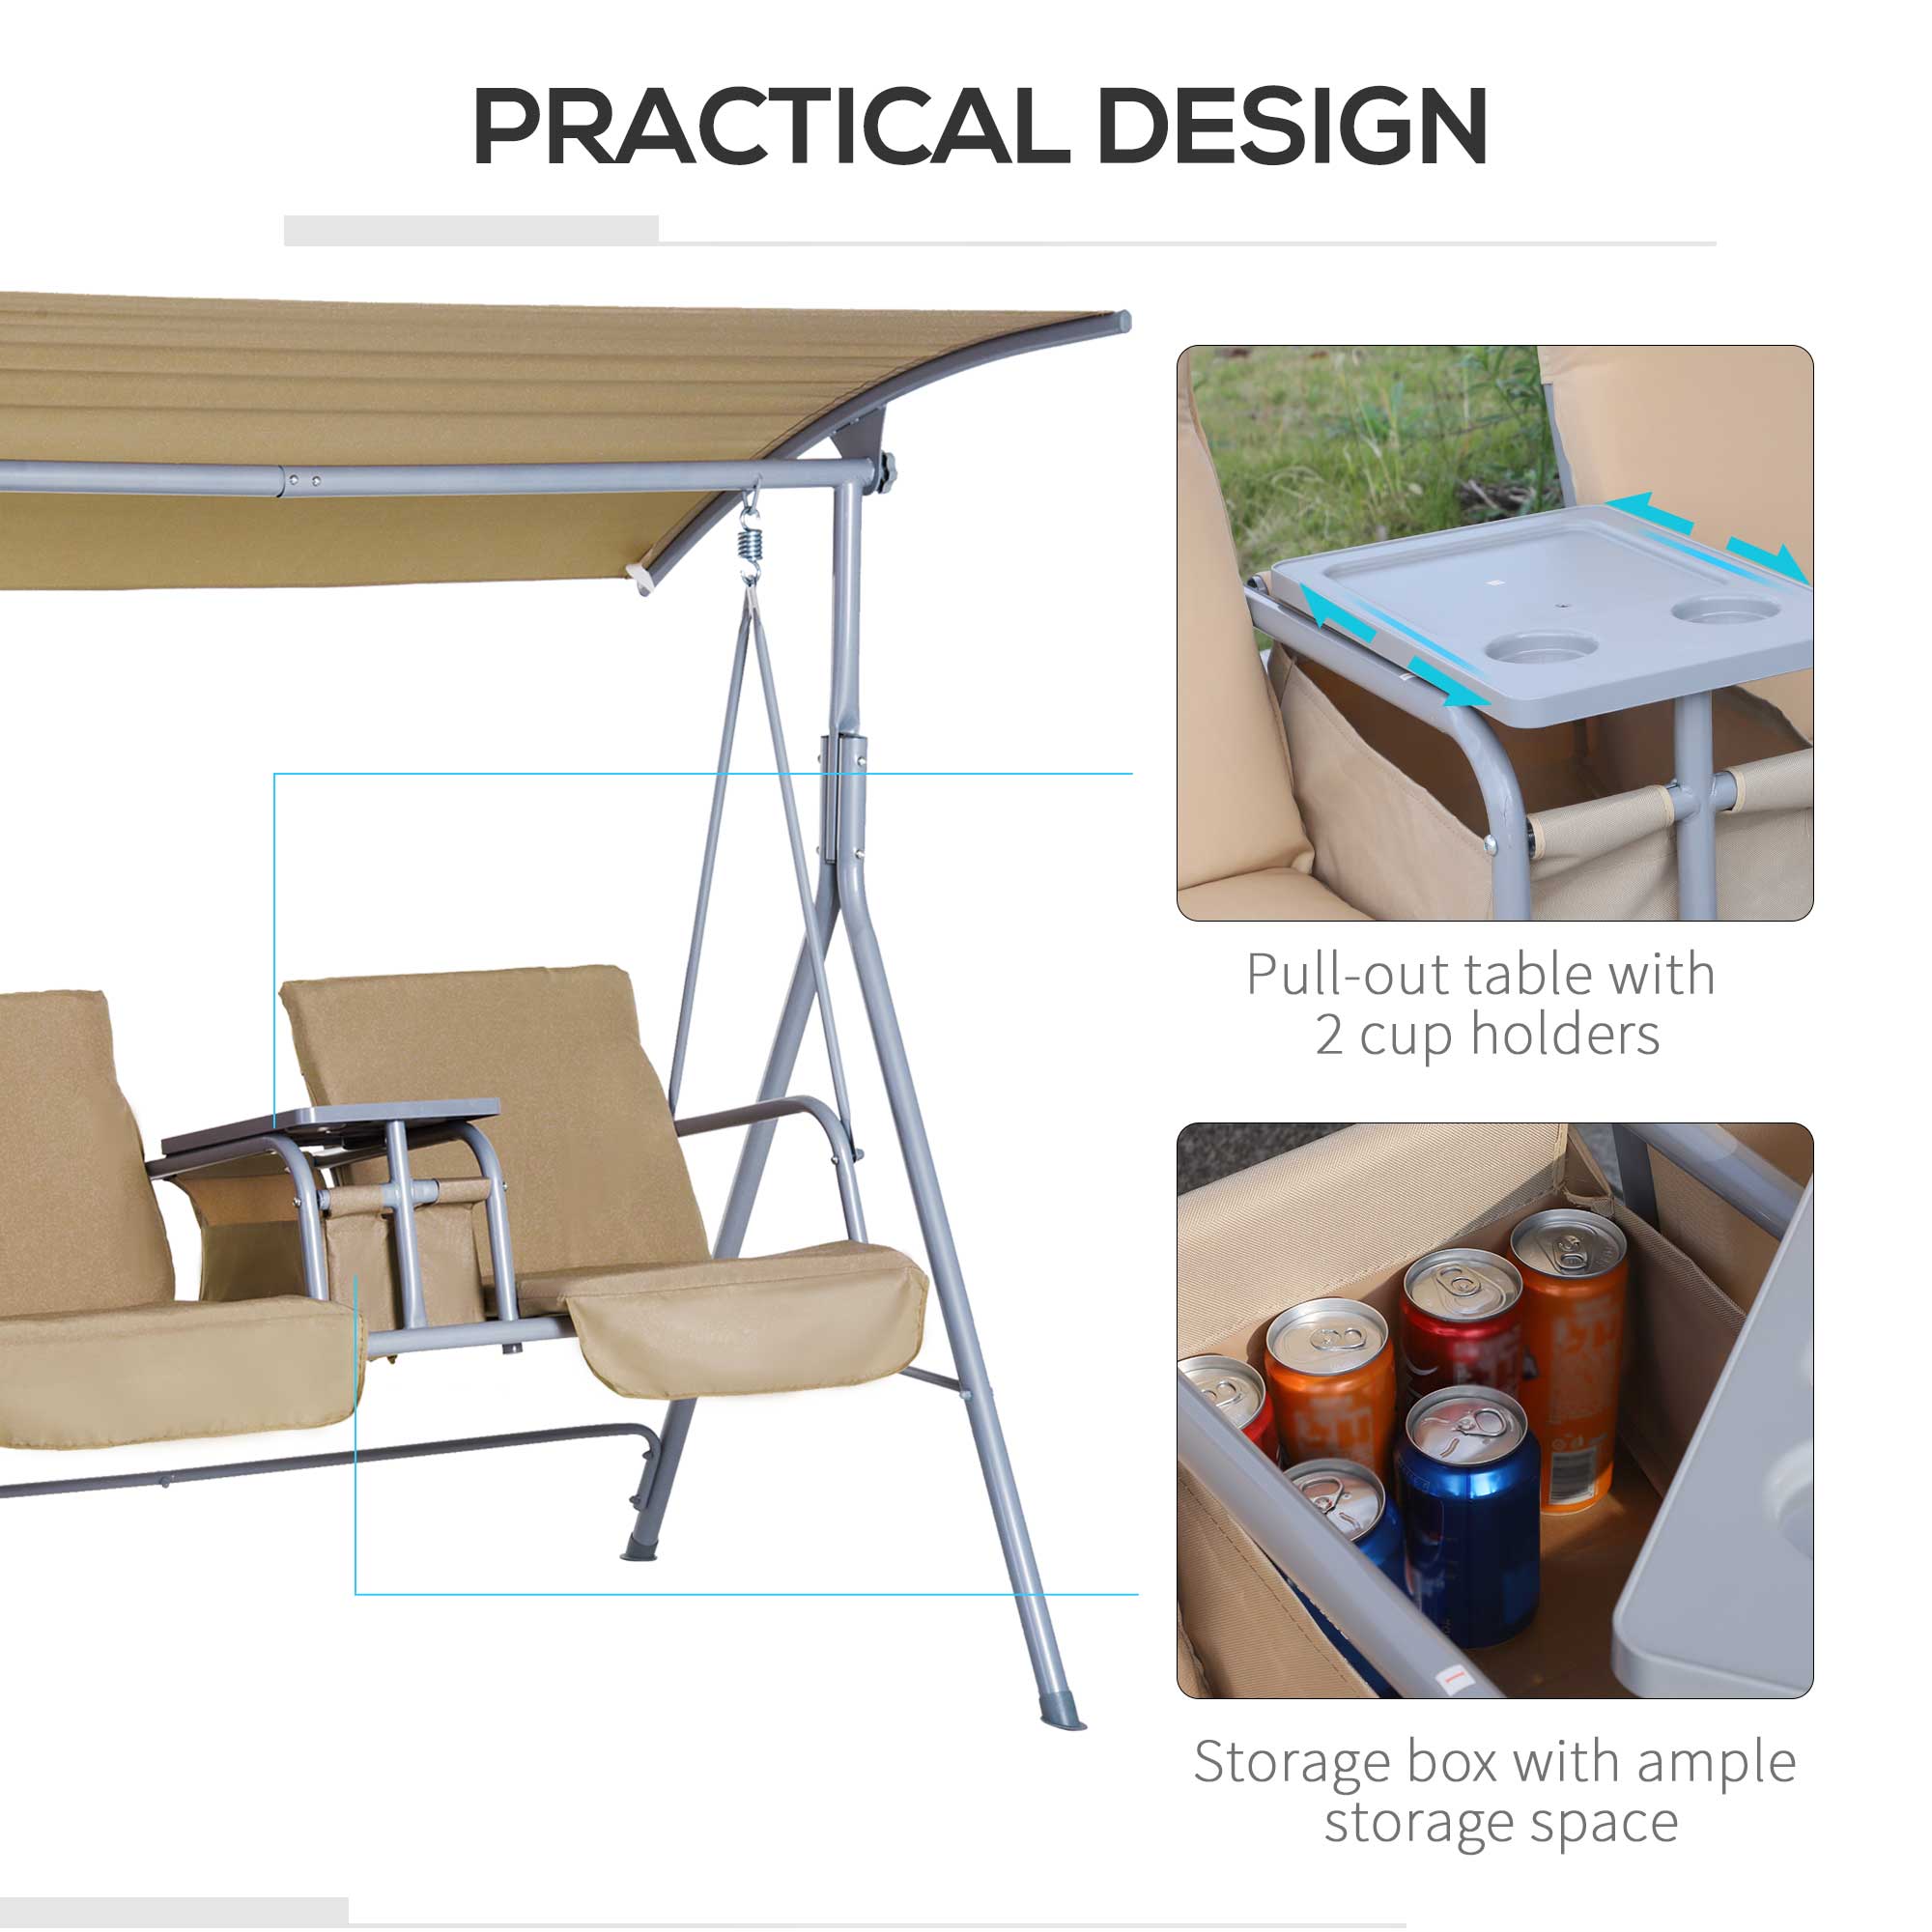 Outsunny 2 Seater Garden Swing Chair Patio Rocking Bench w/ Tilting Canopy, Double Padded Seats, Storage Bag and Tray, Beige - Inspirely